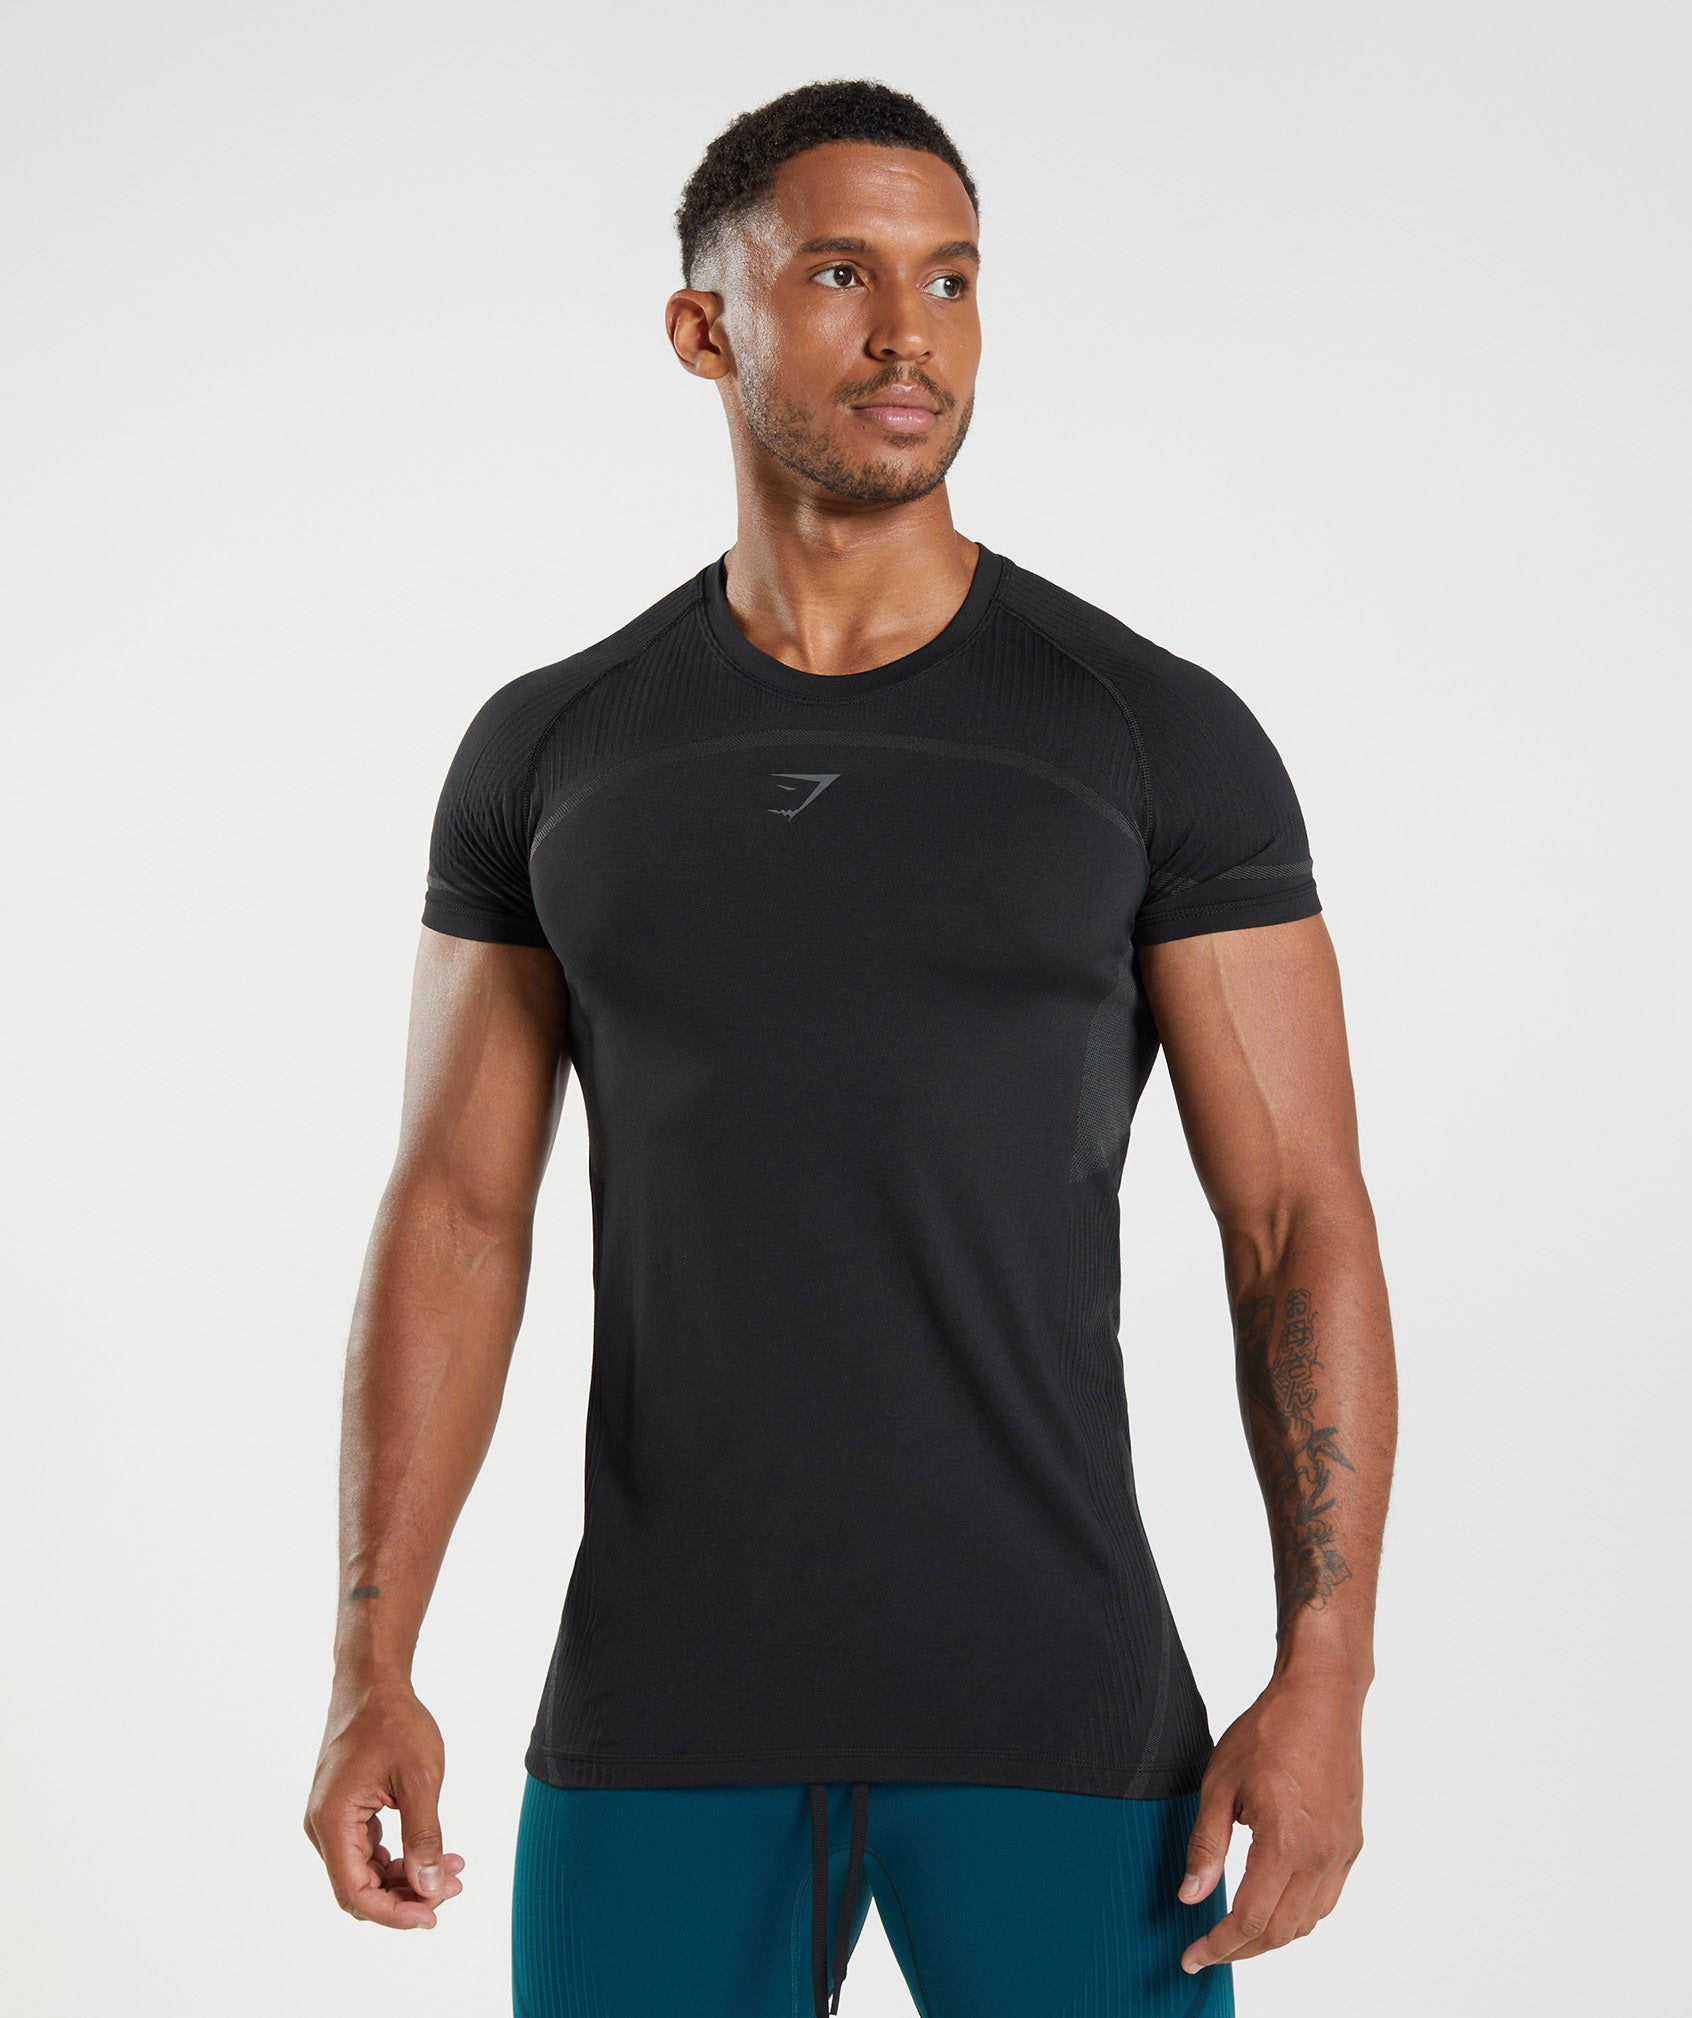 meeteu Homme Manches Longues Compression Baselayer T-Shirt Fitness